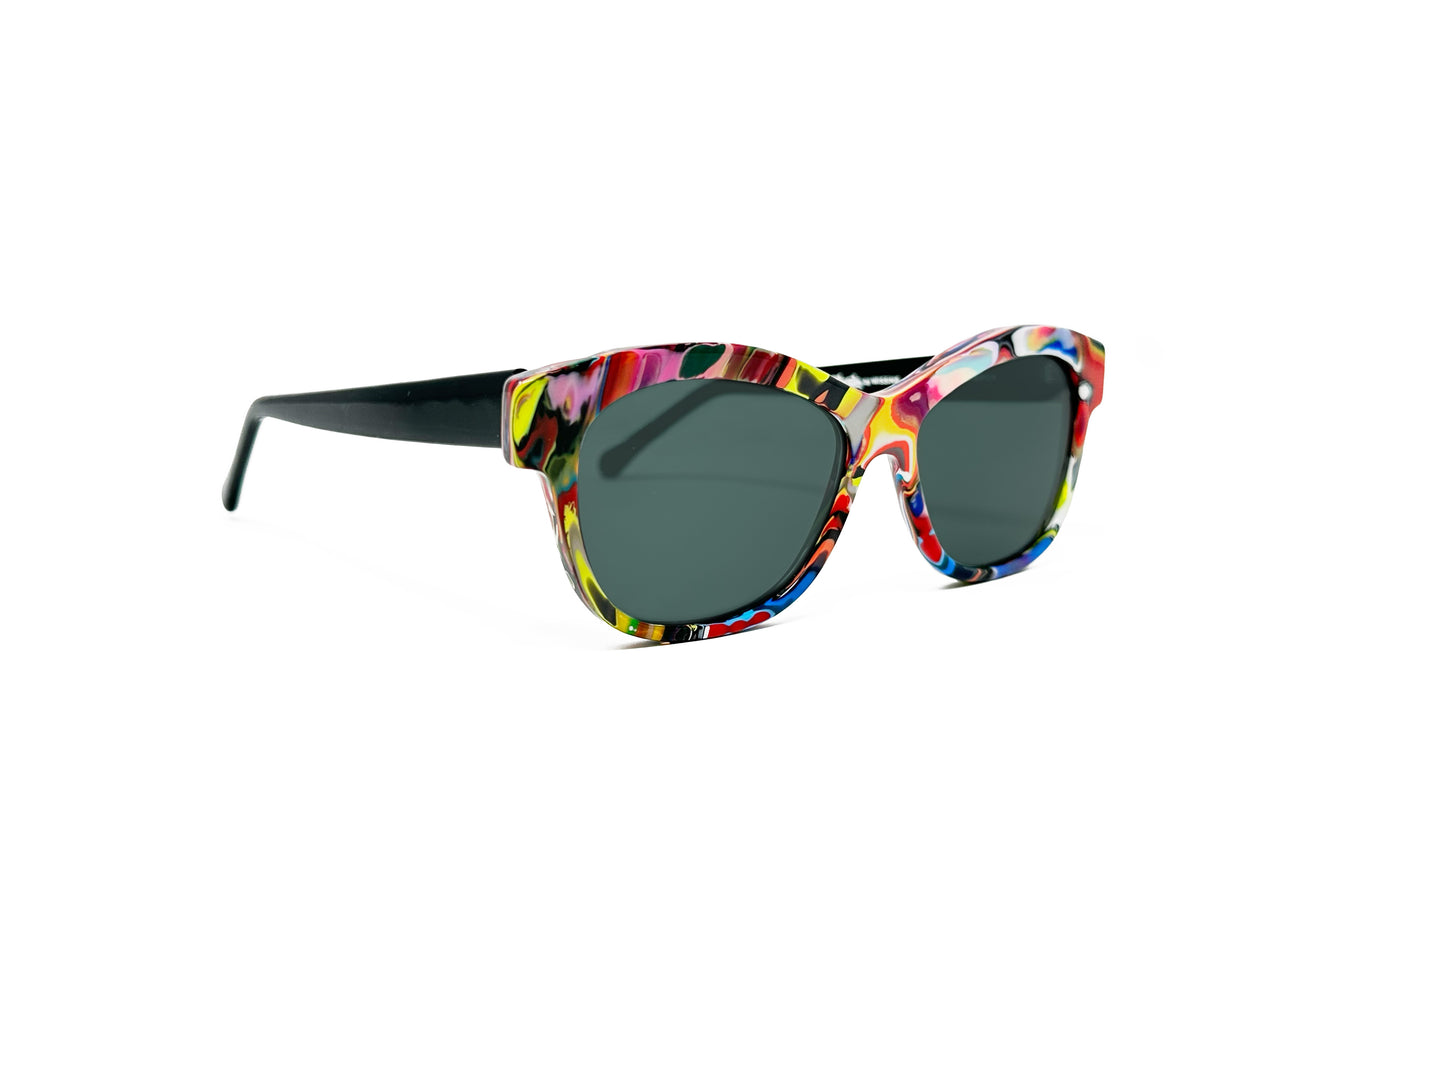 Viktlos rounded-square, recycled acetate sunglass. Model: RC013. Color: 1424 - Multi-colored swirls. Side view.